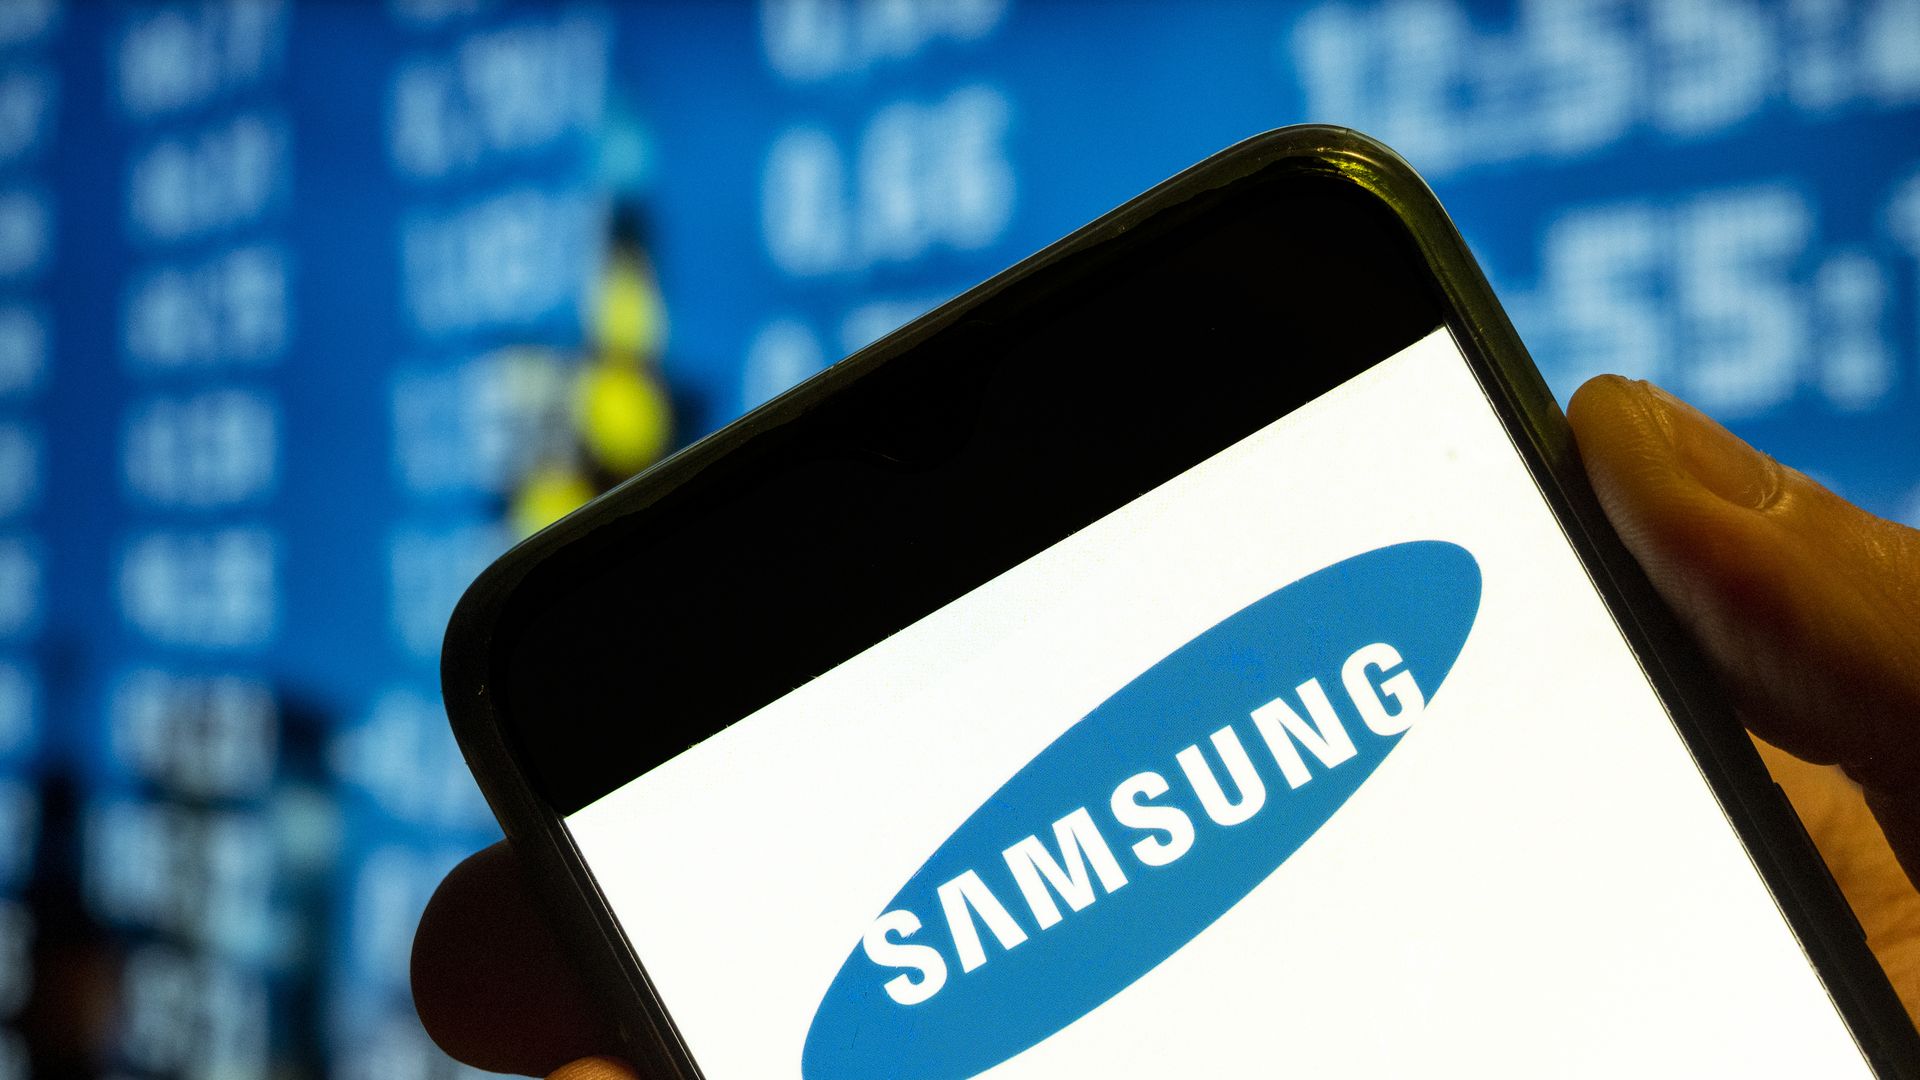 Image of a person holding a phone with the Samsung logo